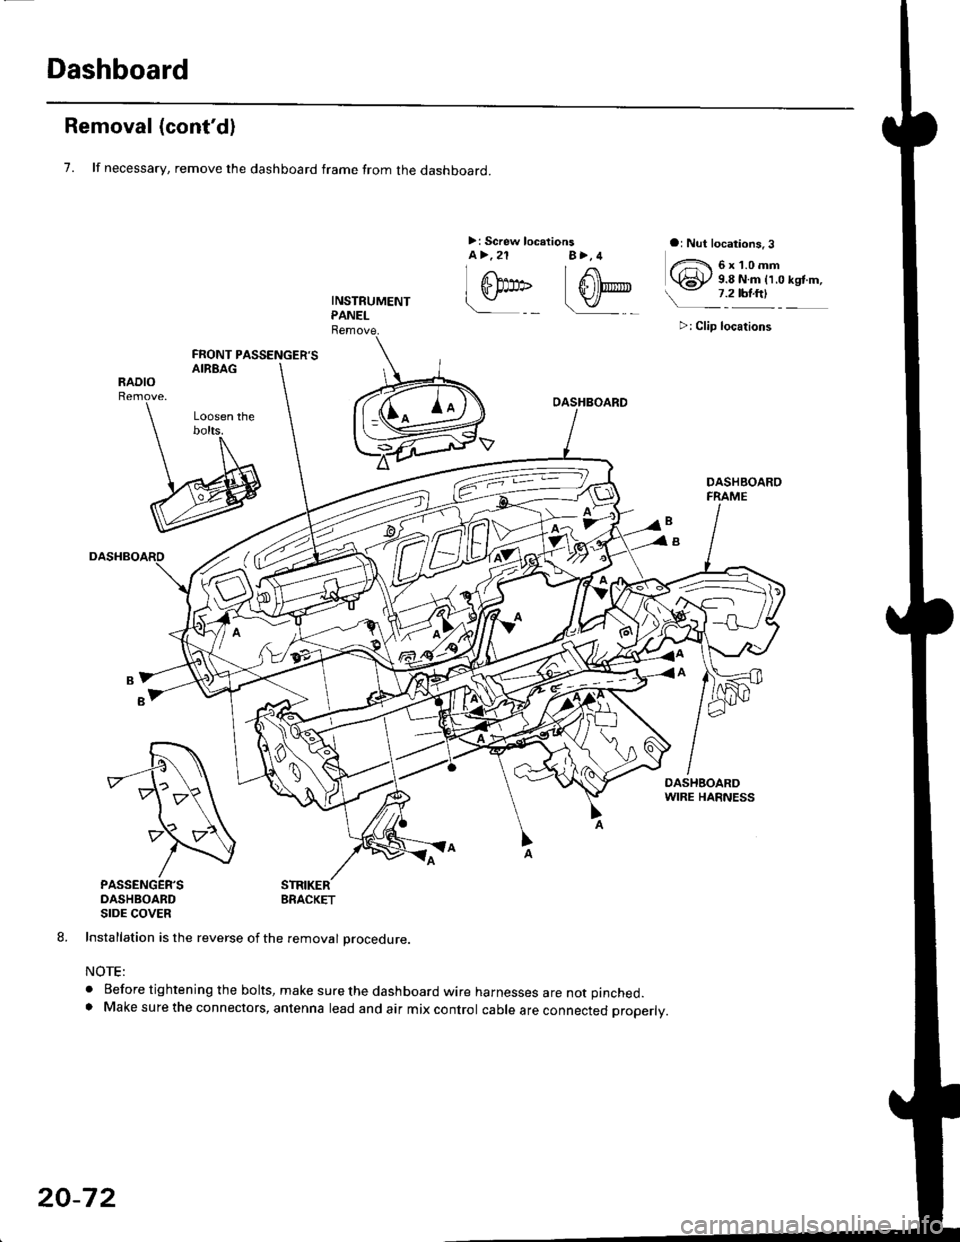 HONDA CIVIC 1997 6.G Workshop Manual Dashboard
Removal (contd)
7. lf necessary, remove the dashboard frame from the dashboard.
>: Screw localionsa>,21 B>,4a: Nut locations, 3
>: Clip locations
l^1./\
I Shl: OlbtvY/l\-]1
ra 6 x 1.0 m